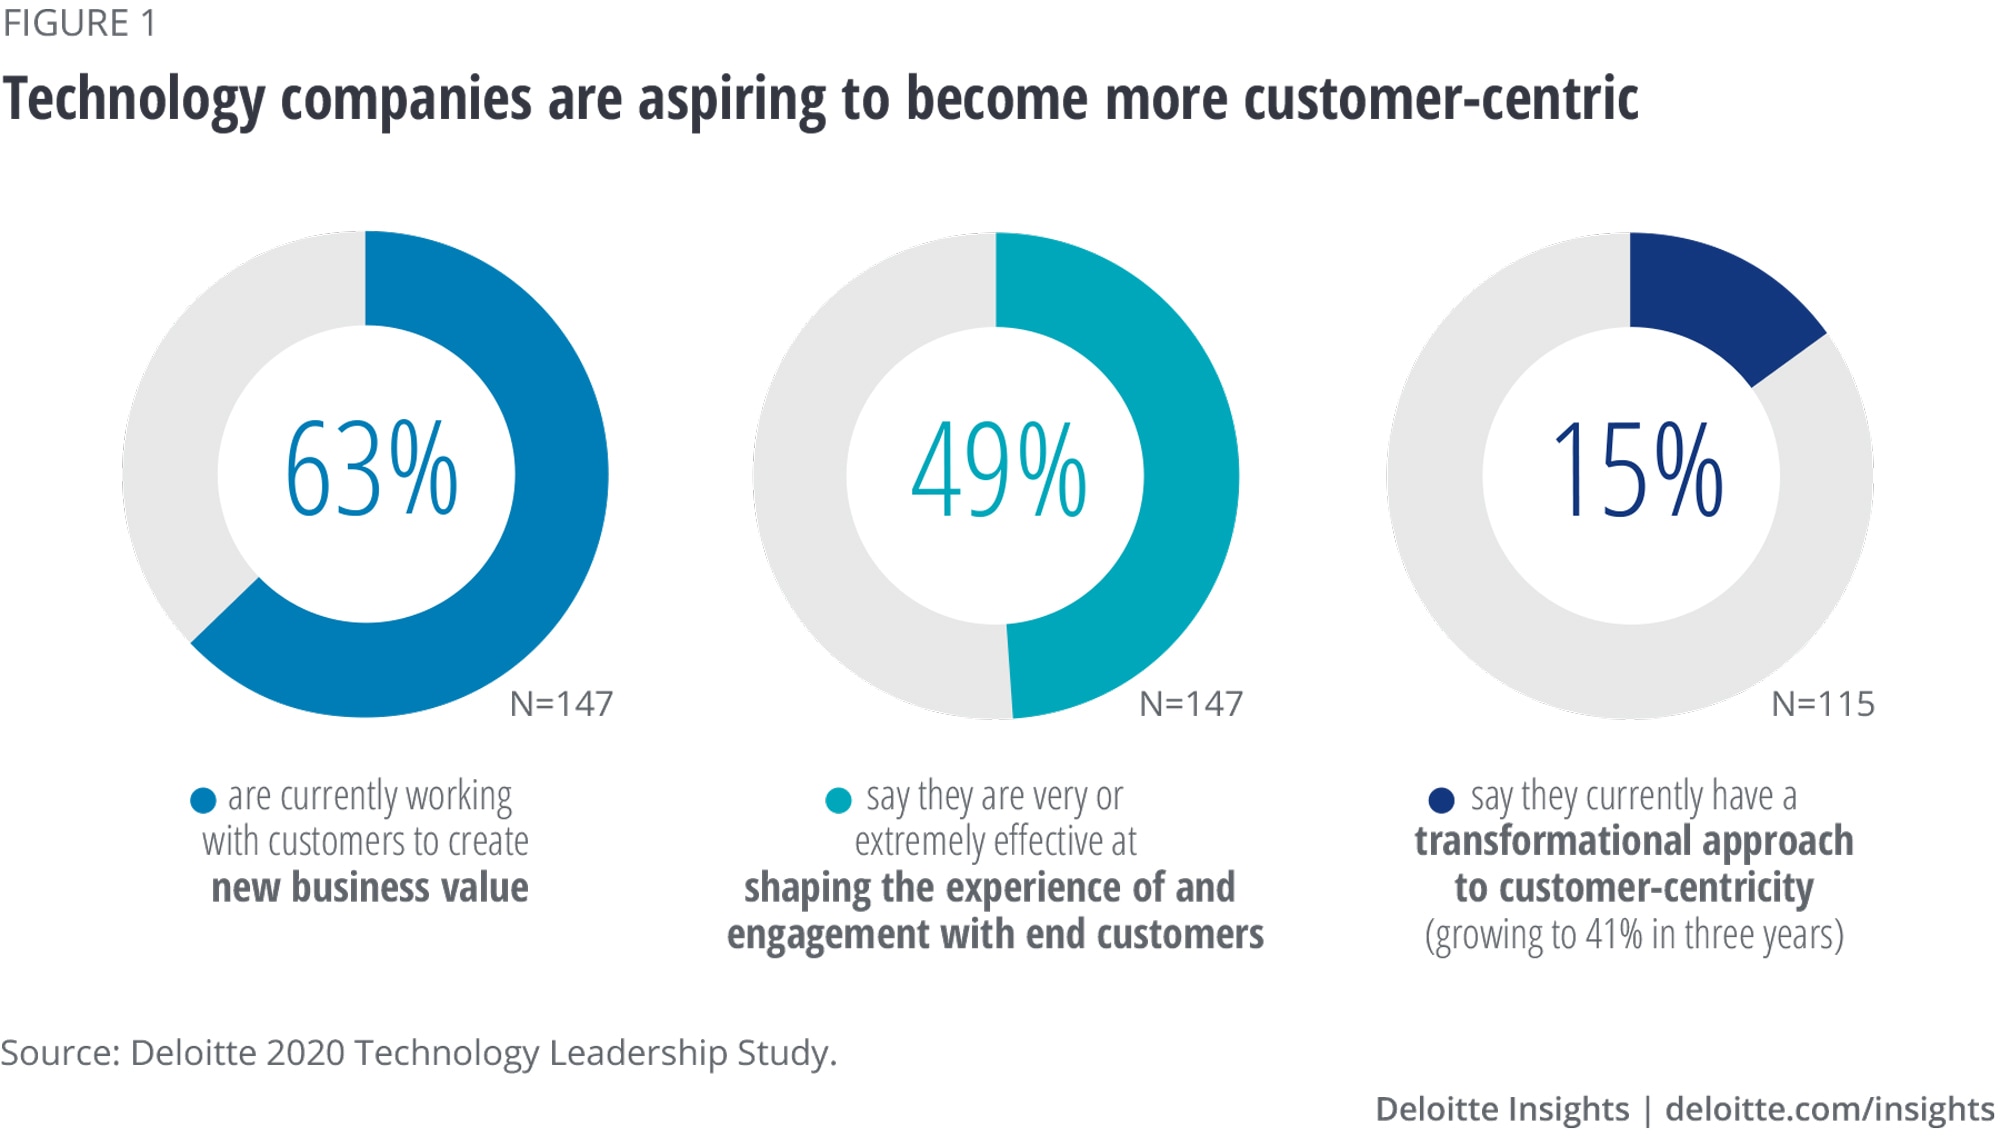 Technology companies are aspiring to become more customer-centric